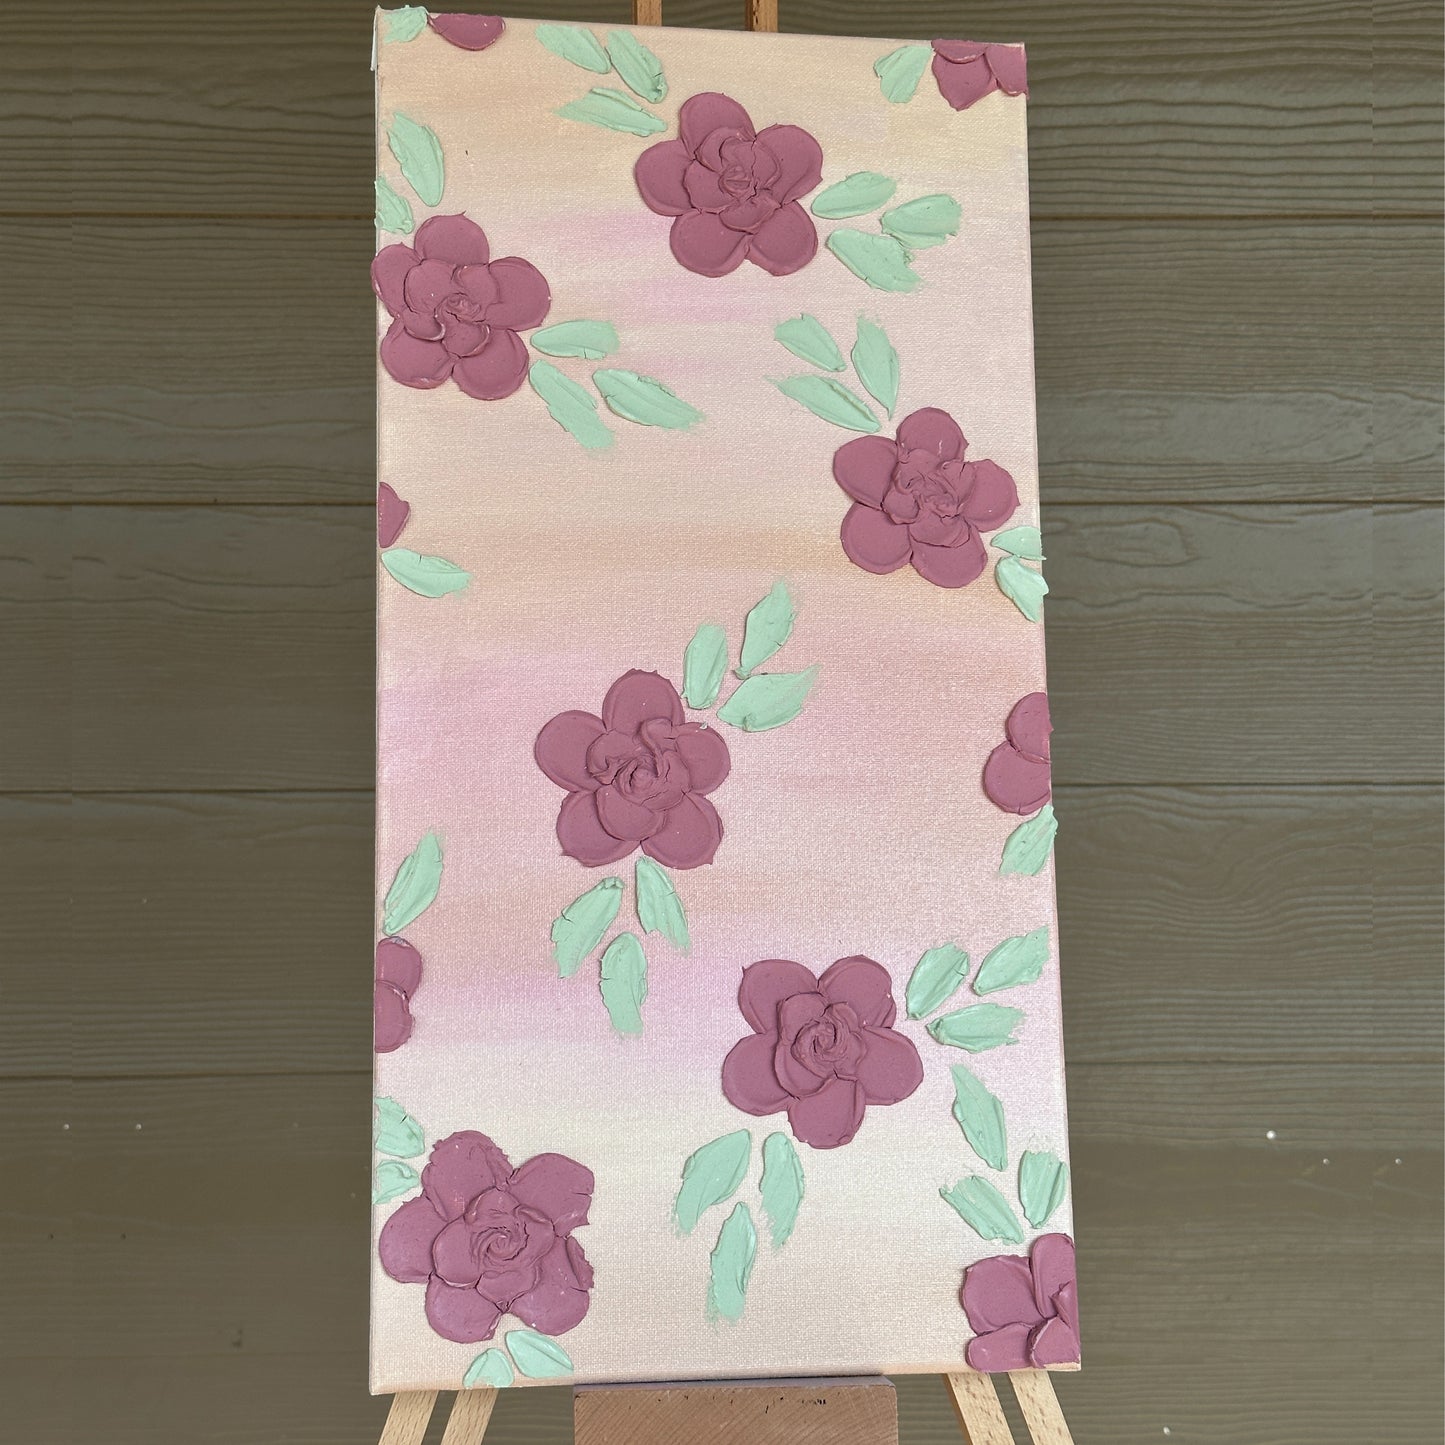 3D Texture Mauve Roses on Pinky Beige 10"x20"